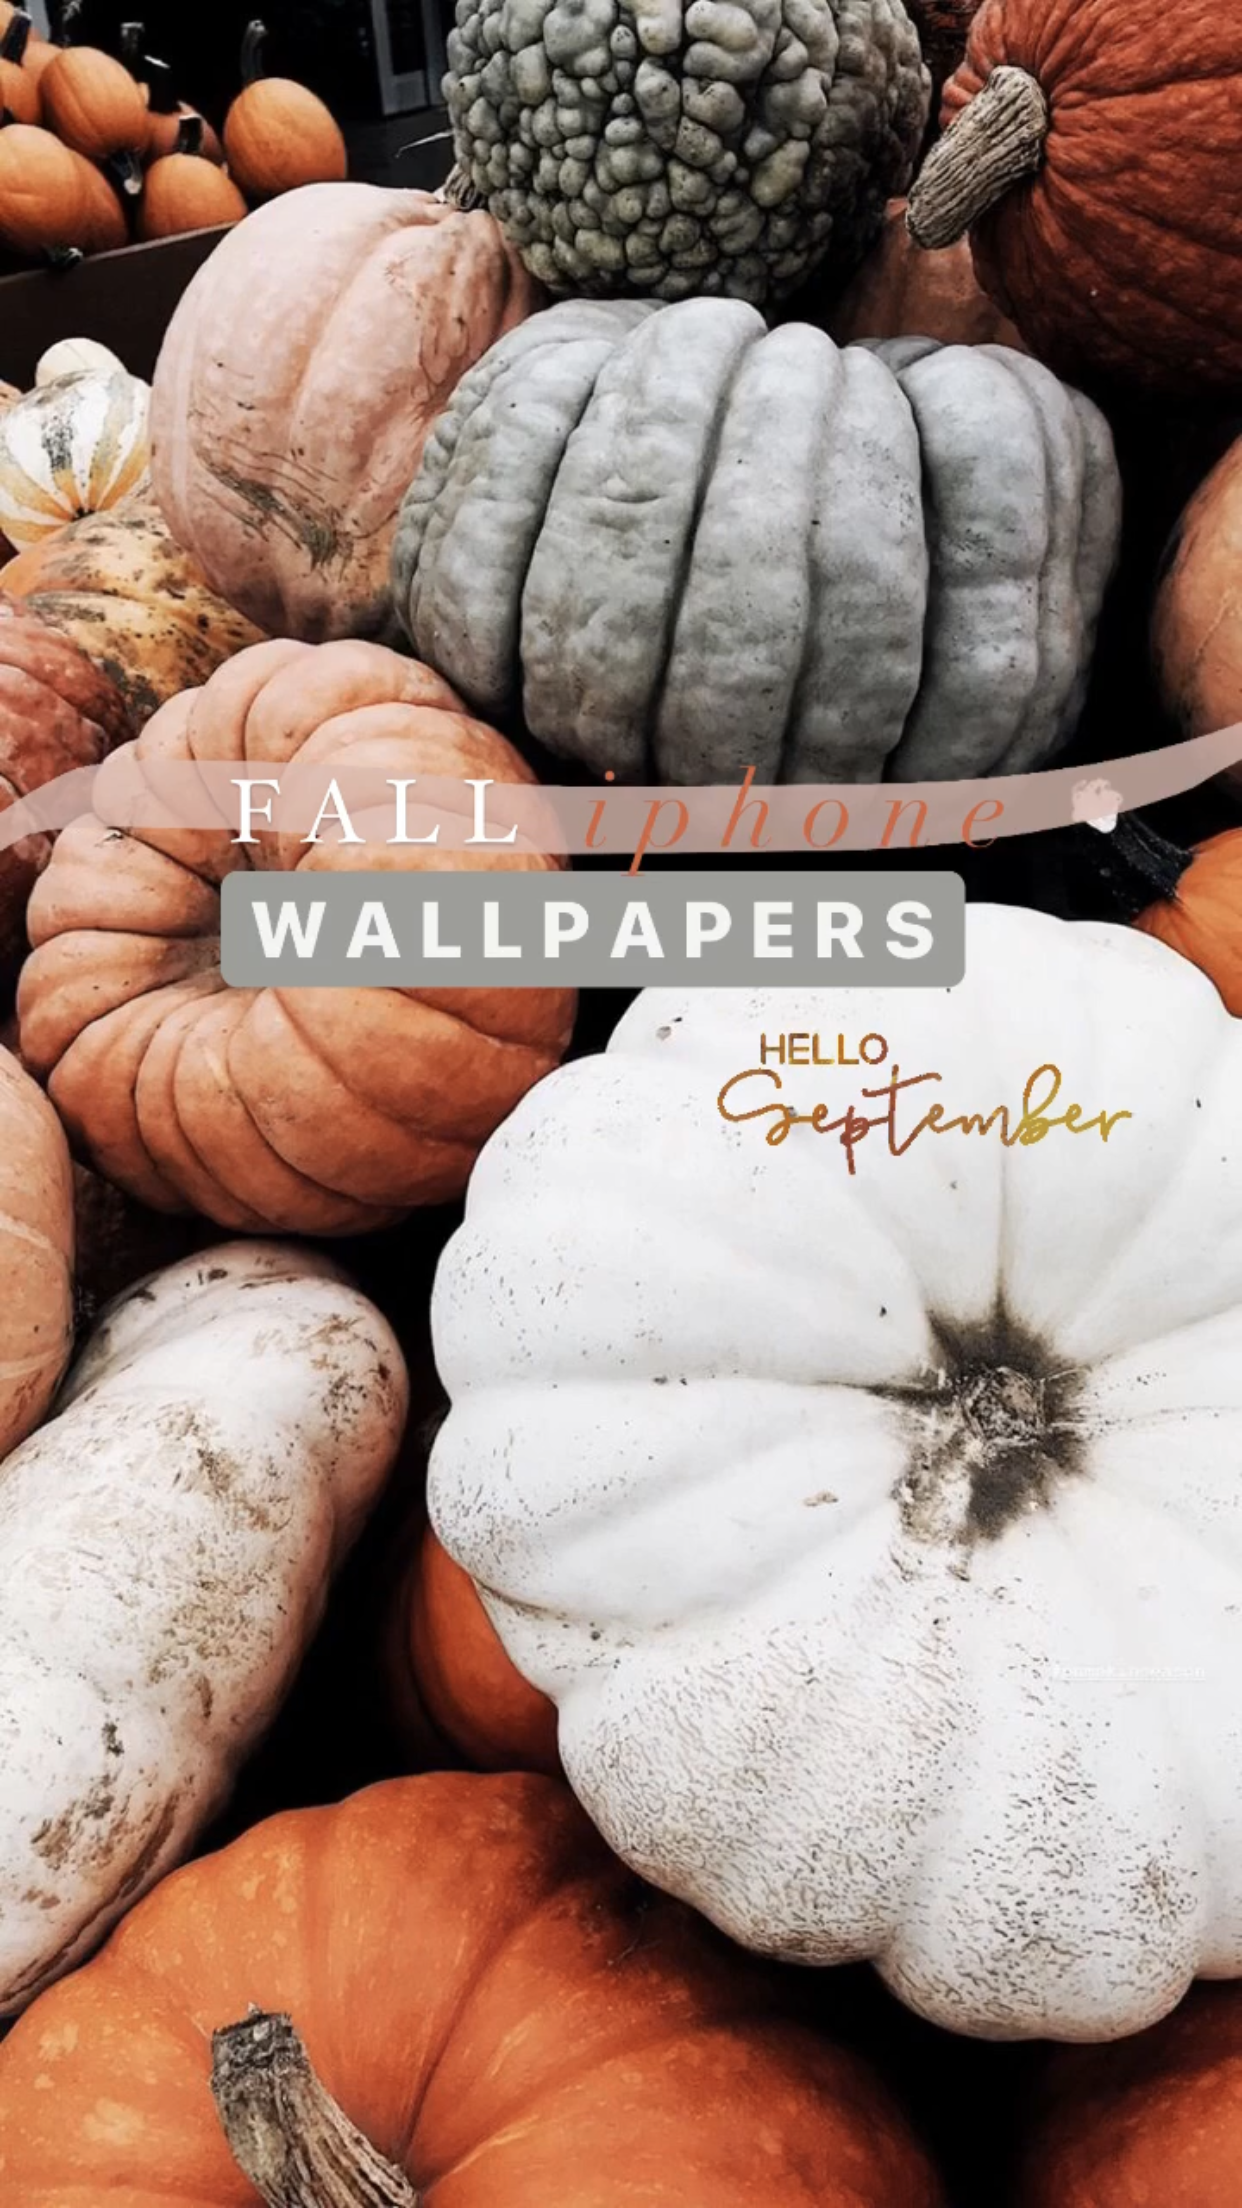 21 Aesthetic Fall Iphone Wallpapers You Need for Spooky Season! – Chasing  Chelsea